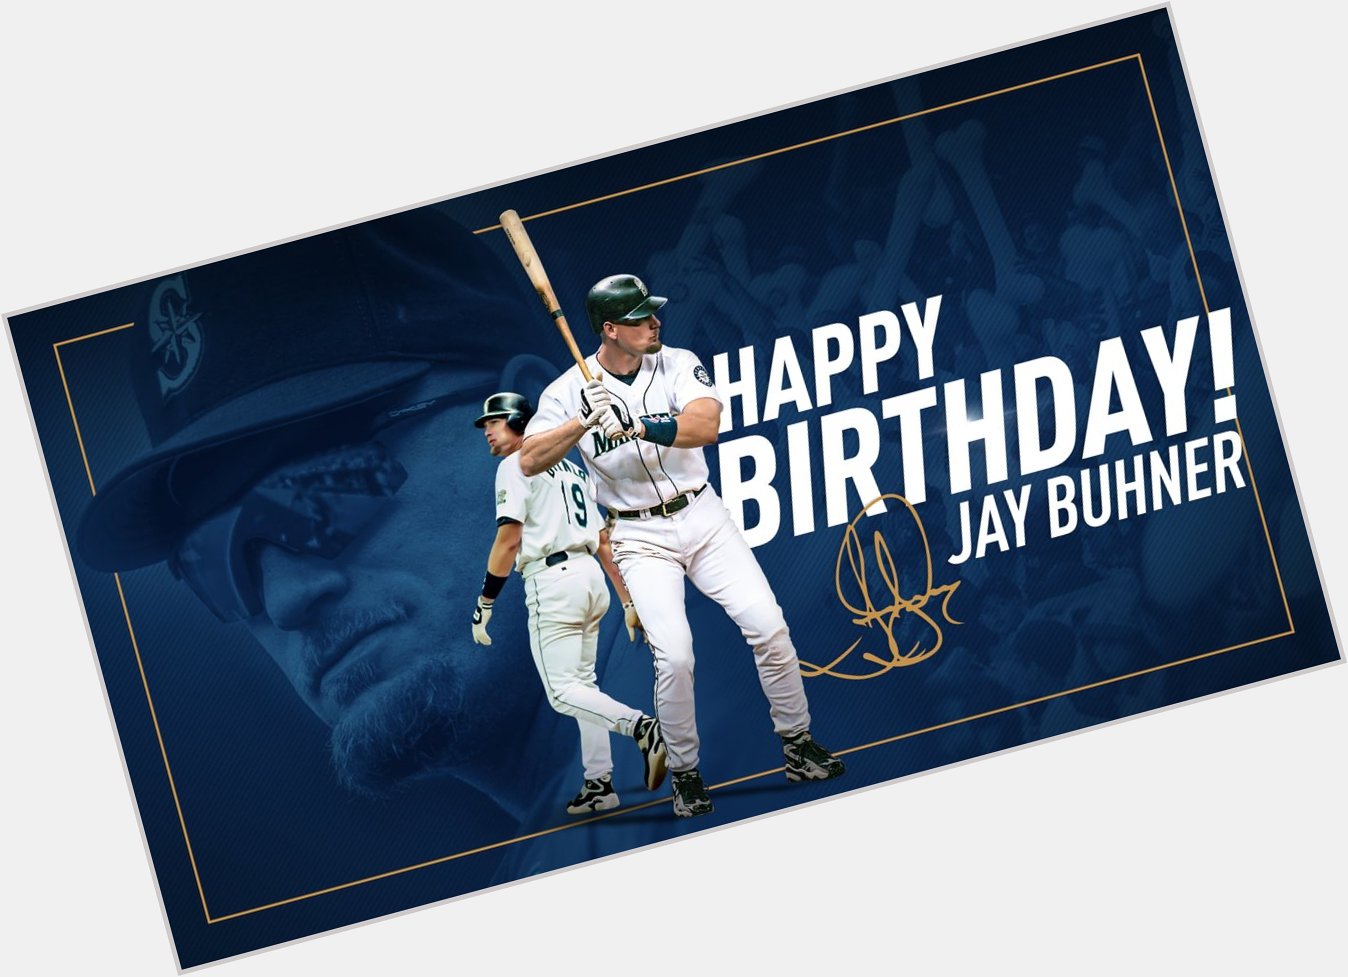 Join us in wishing Mariners Hall of Famer Jay Buhner a very happy birthday!  